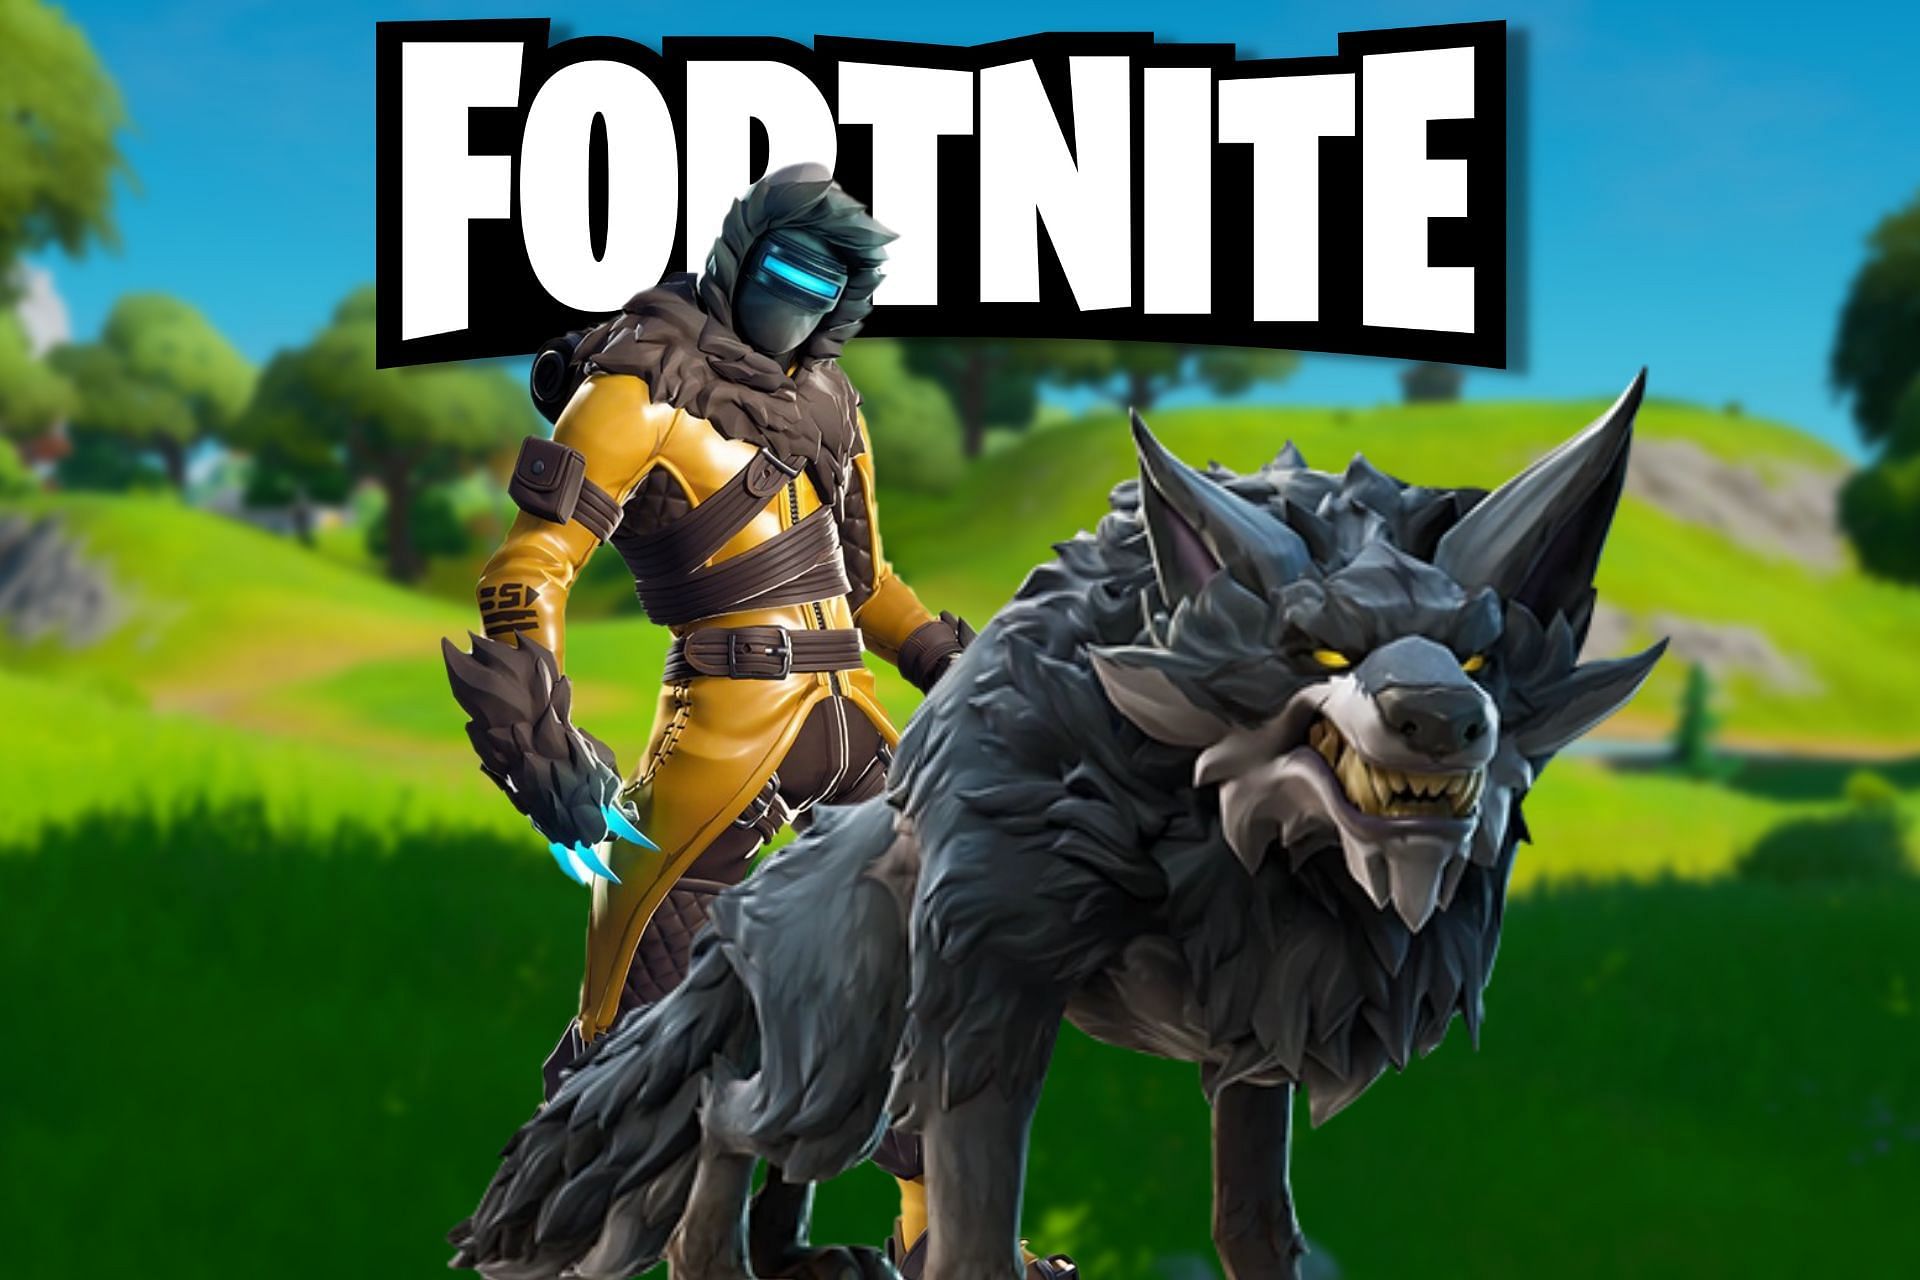 Riding a wolf into battle would be a dream come true for many in Fortnite (Image via Sportskeeda)